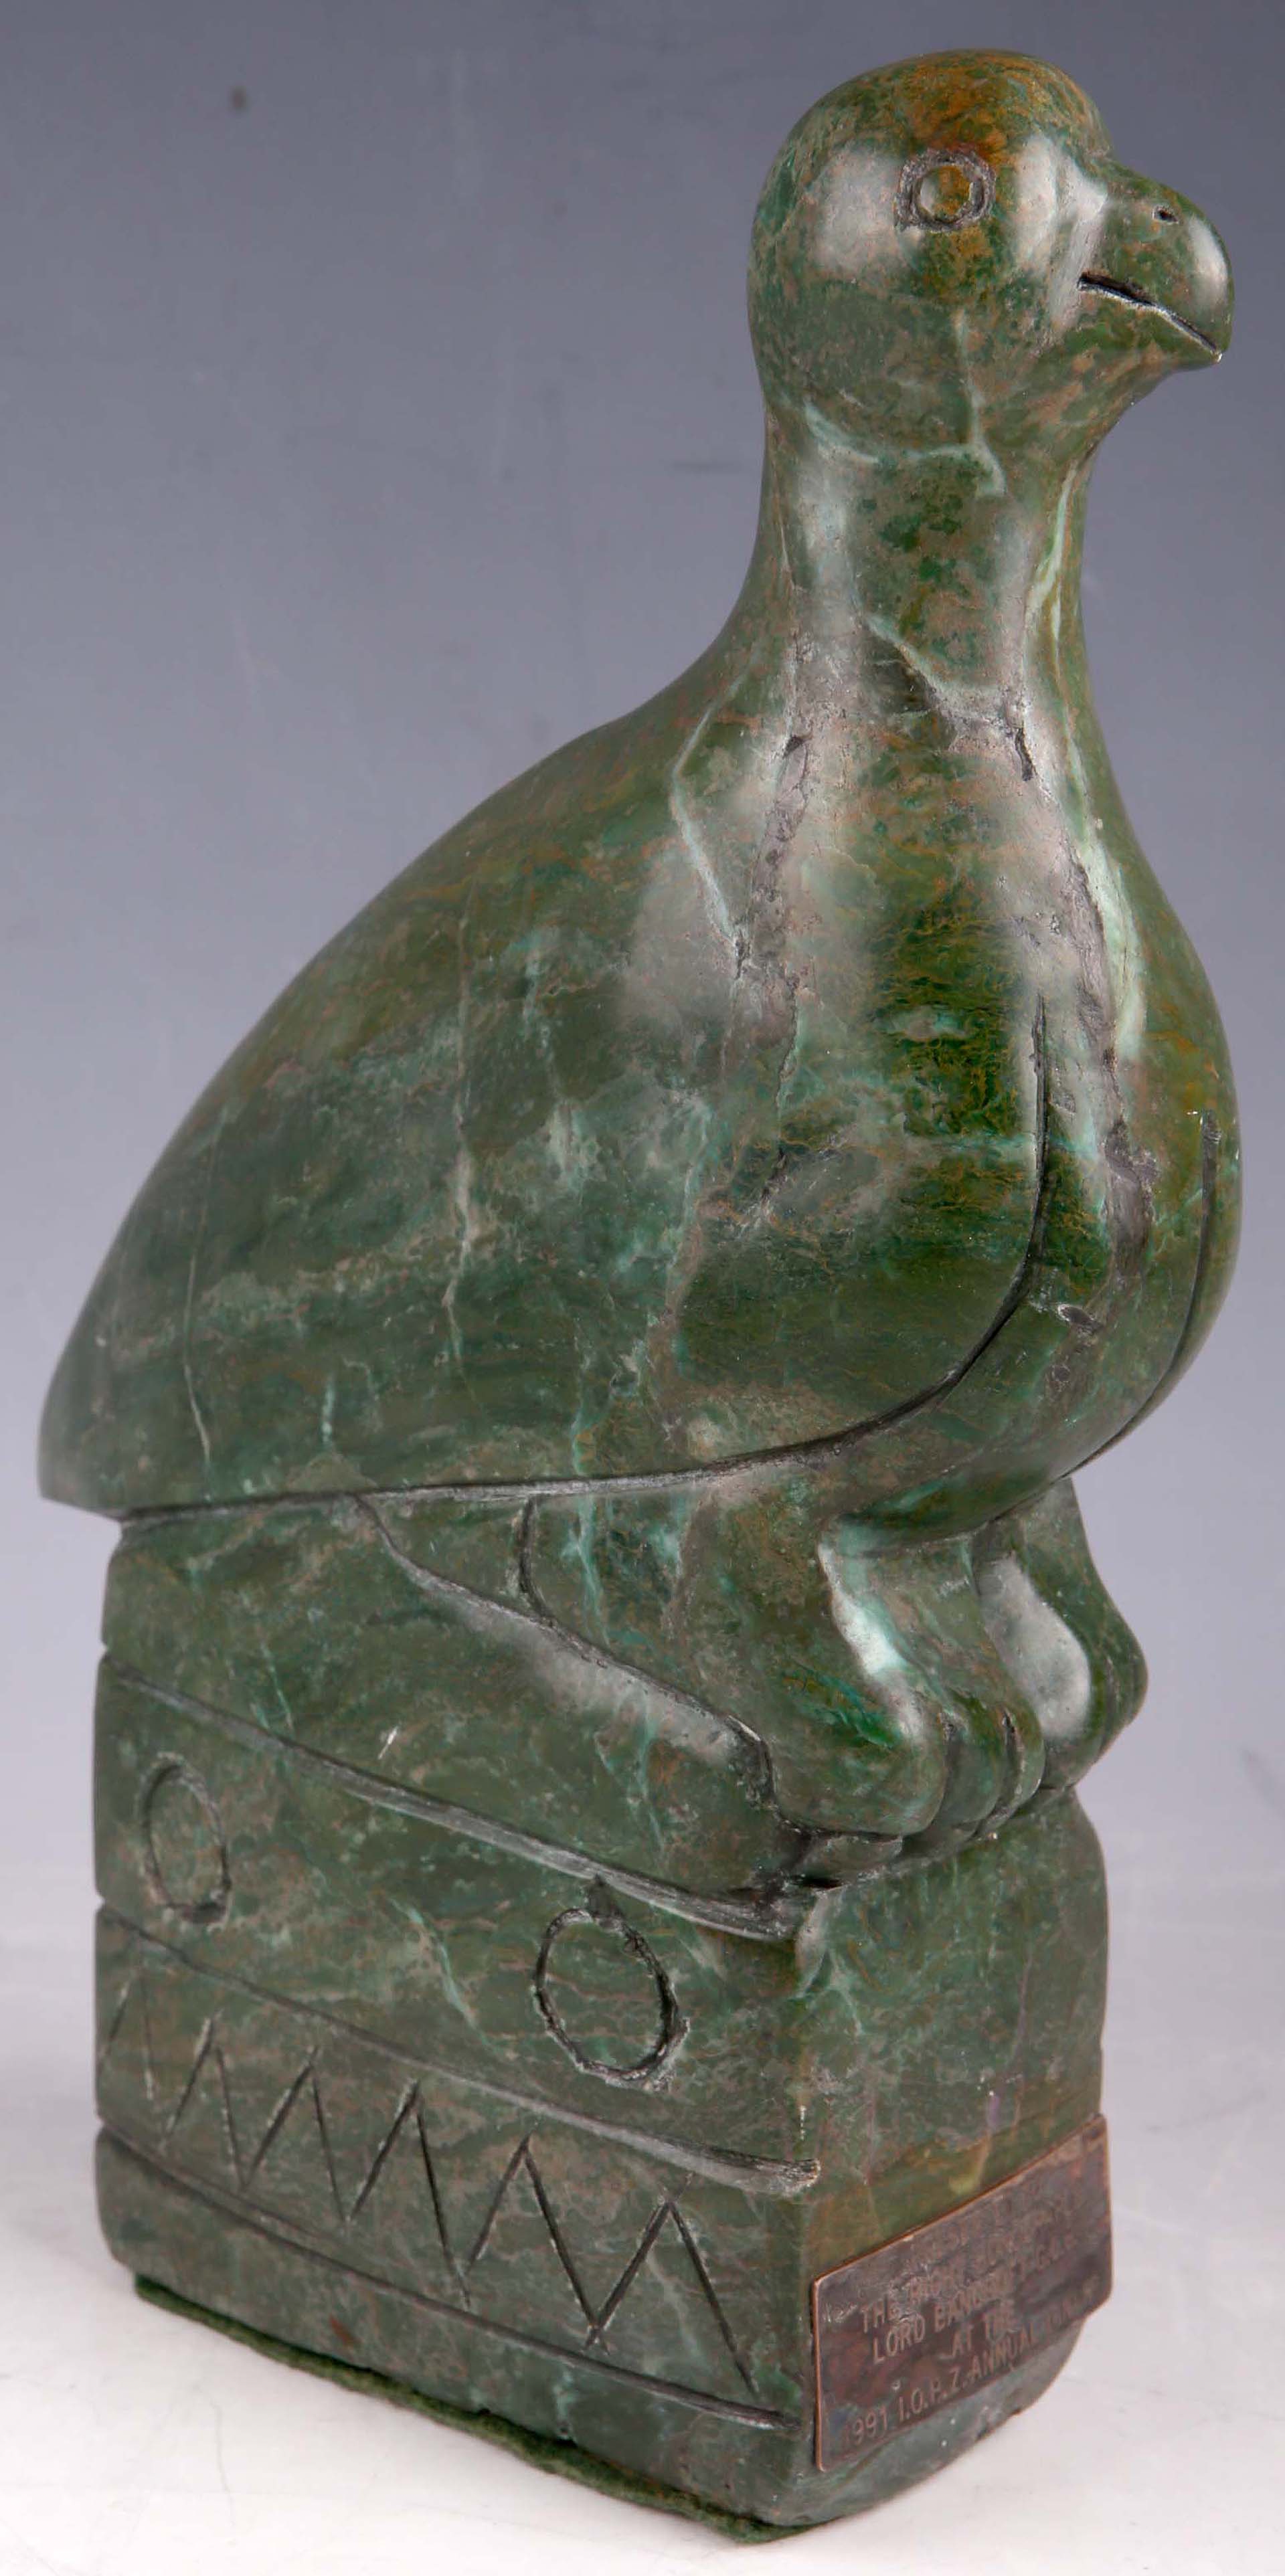 A South American dark green variegated stone sculpture of bird, bears presentation plaque for Lord